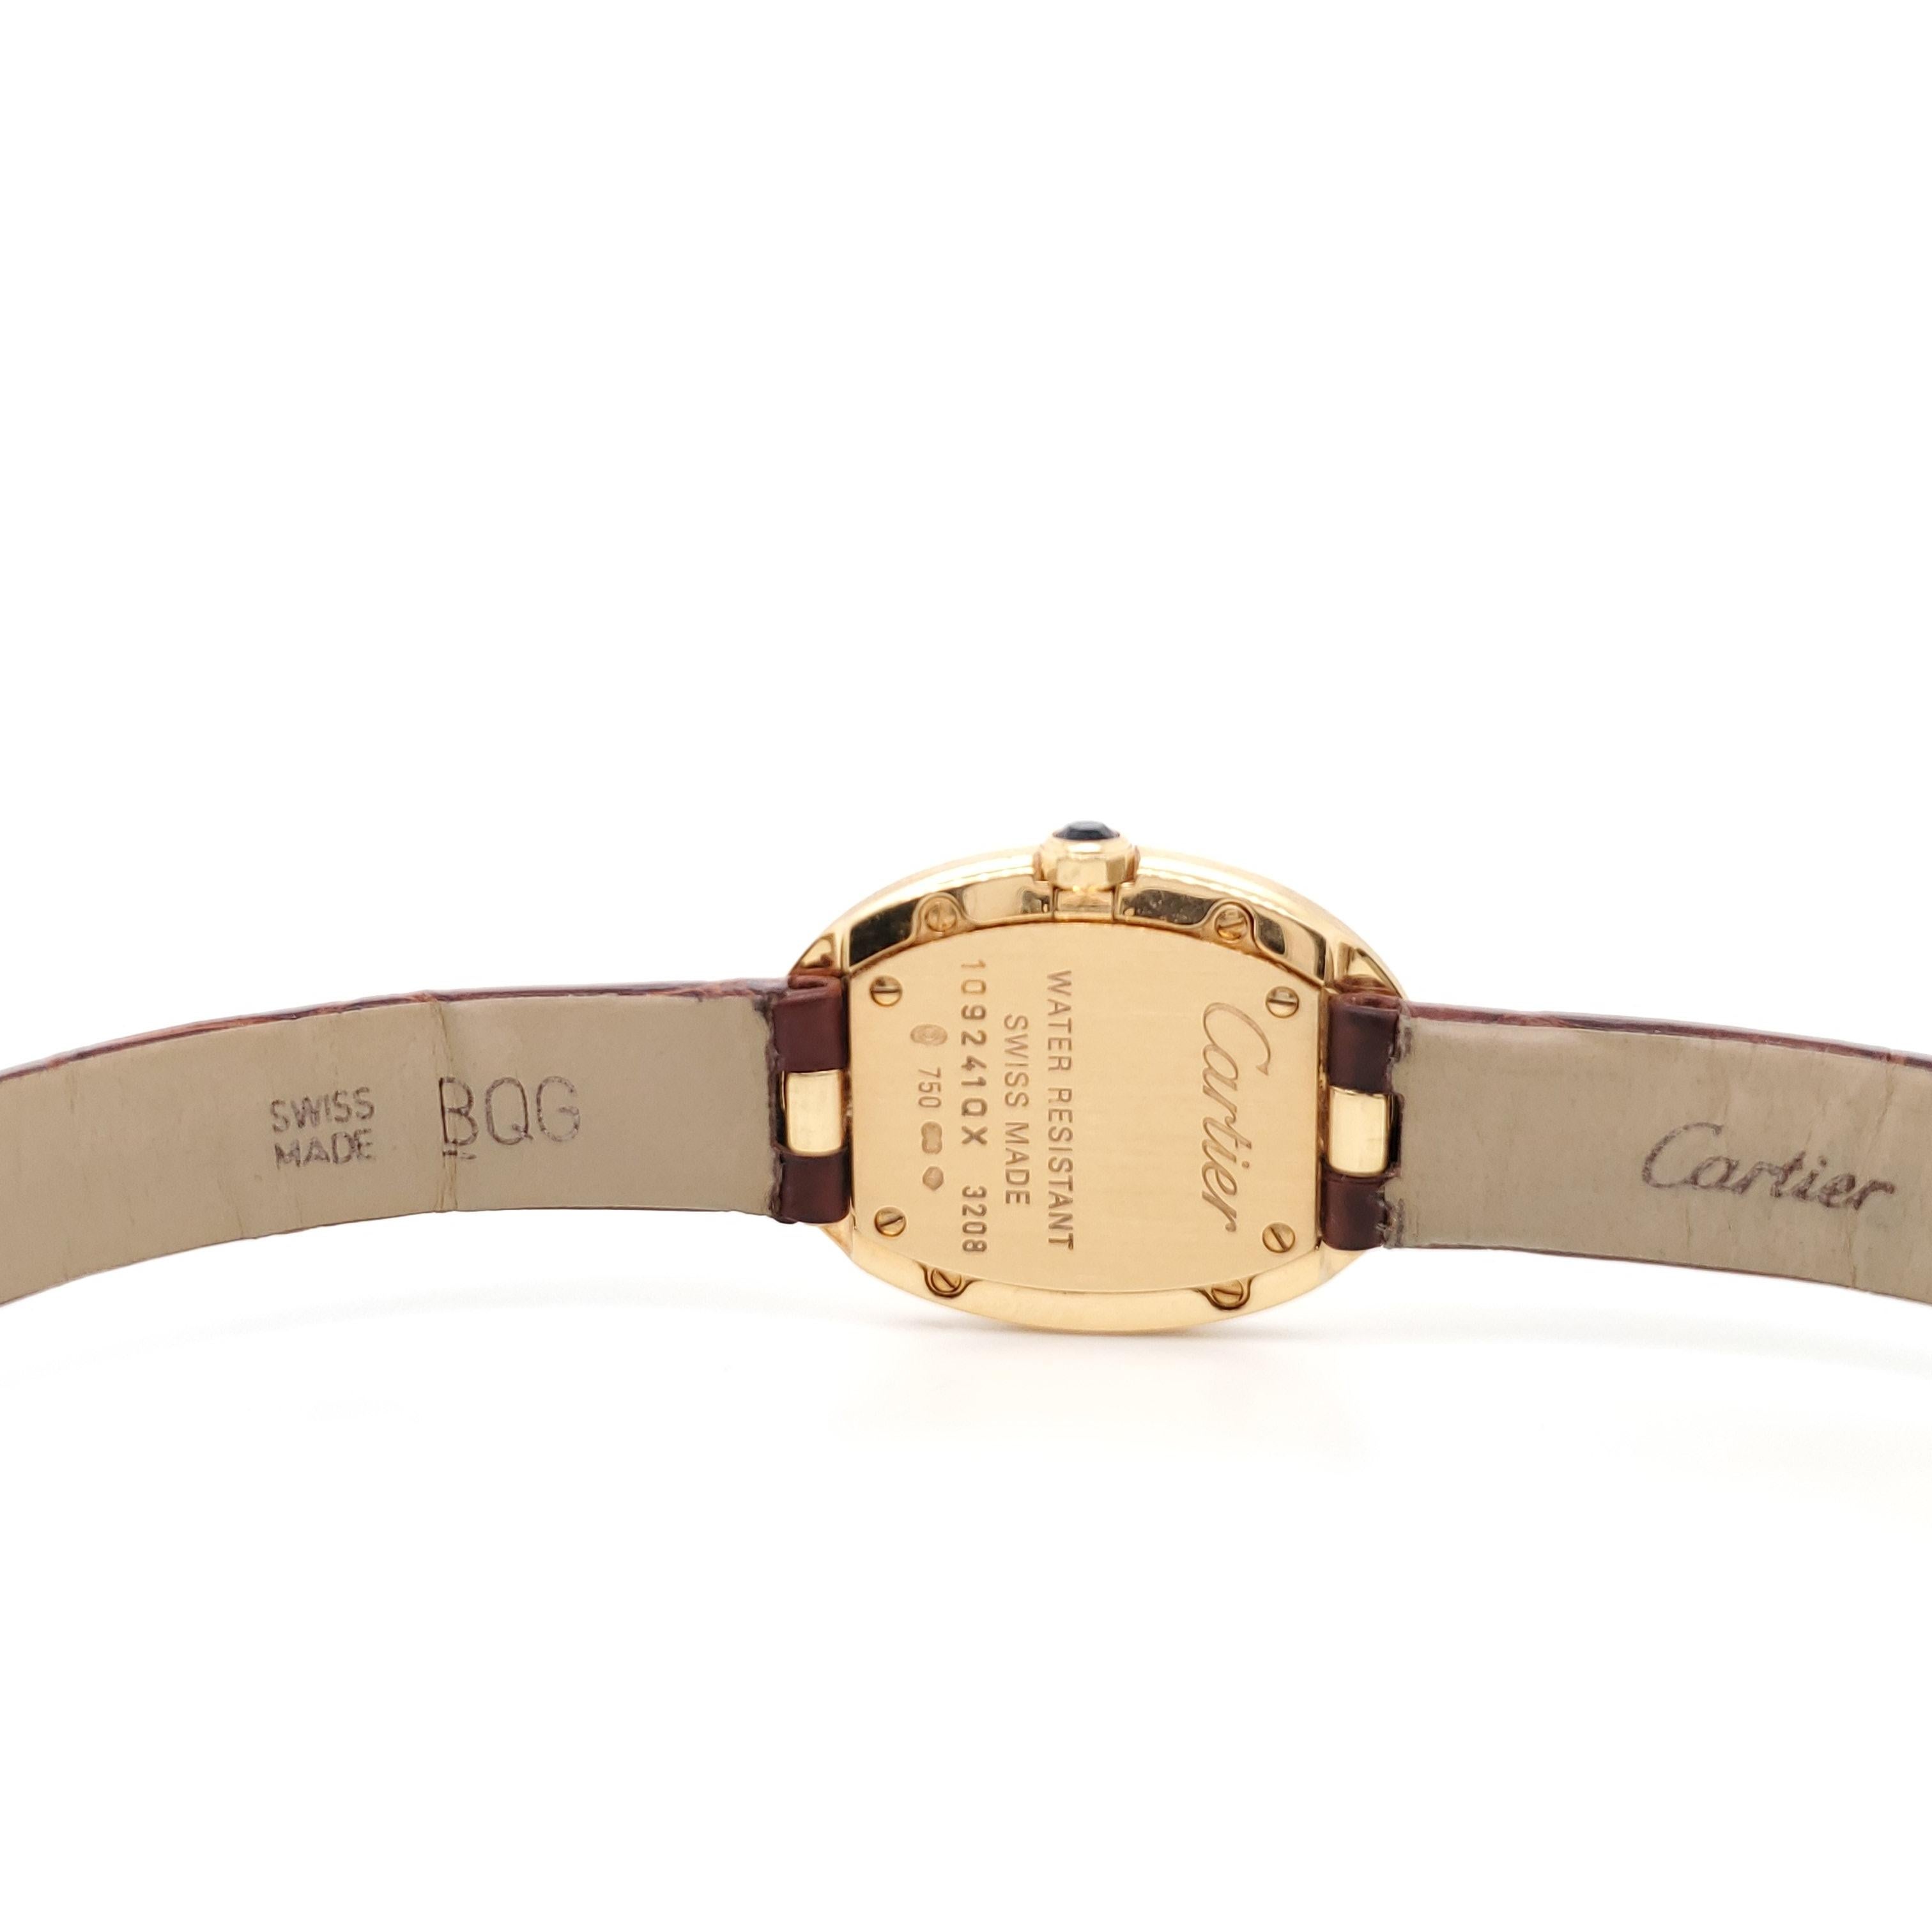 Authentic timeless Cartier Baignoire watch in 18 karat yellow on slender brown leather strap. 32mm x 24mm dial features black roman numerals and signature blue sword-shaped hands. Sapphire crystal. Quartz movement. Case, dial and movement signed